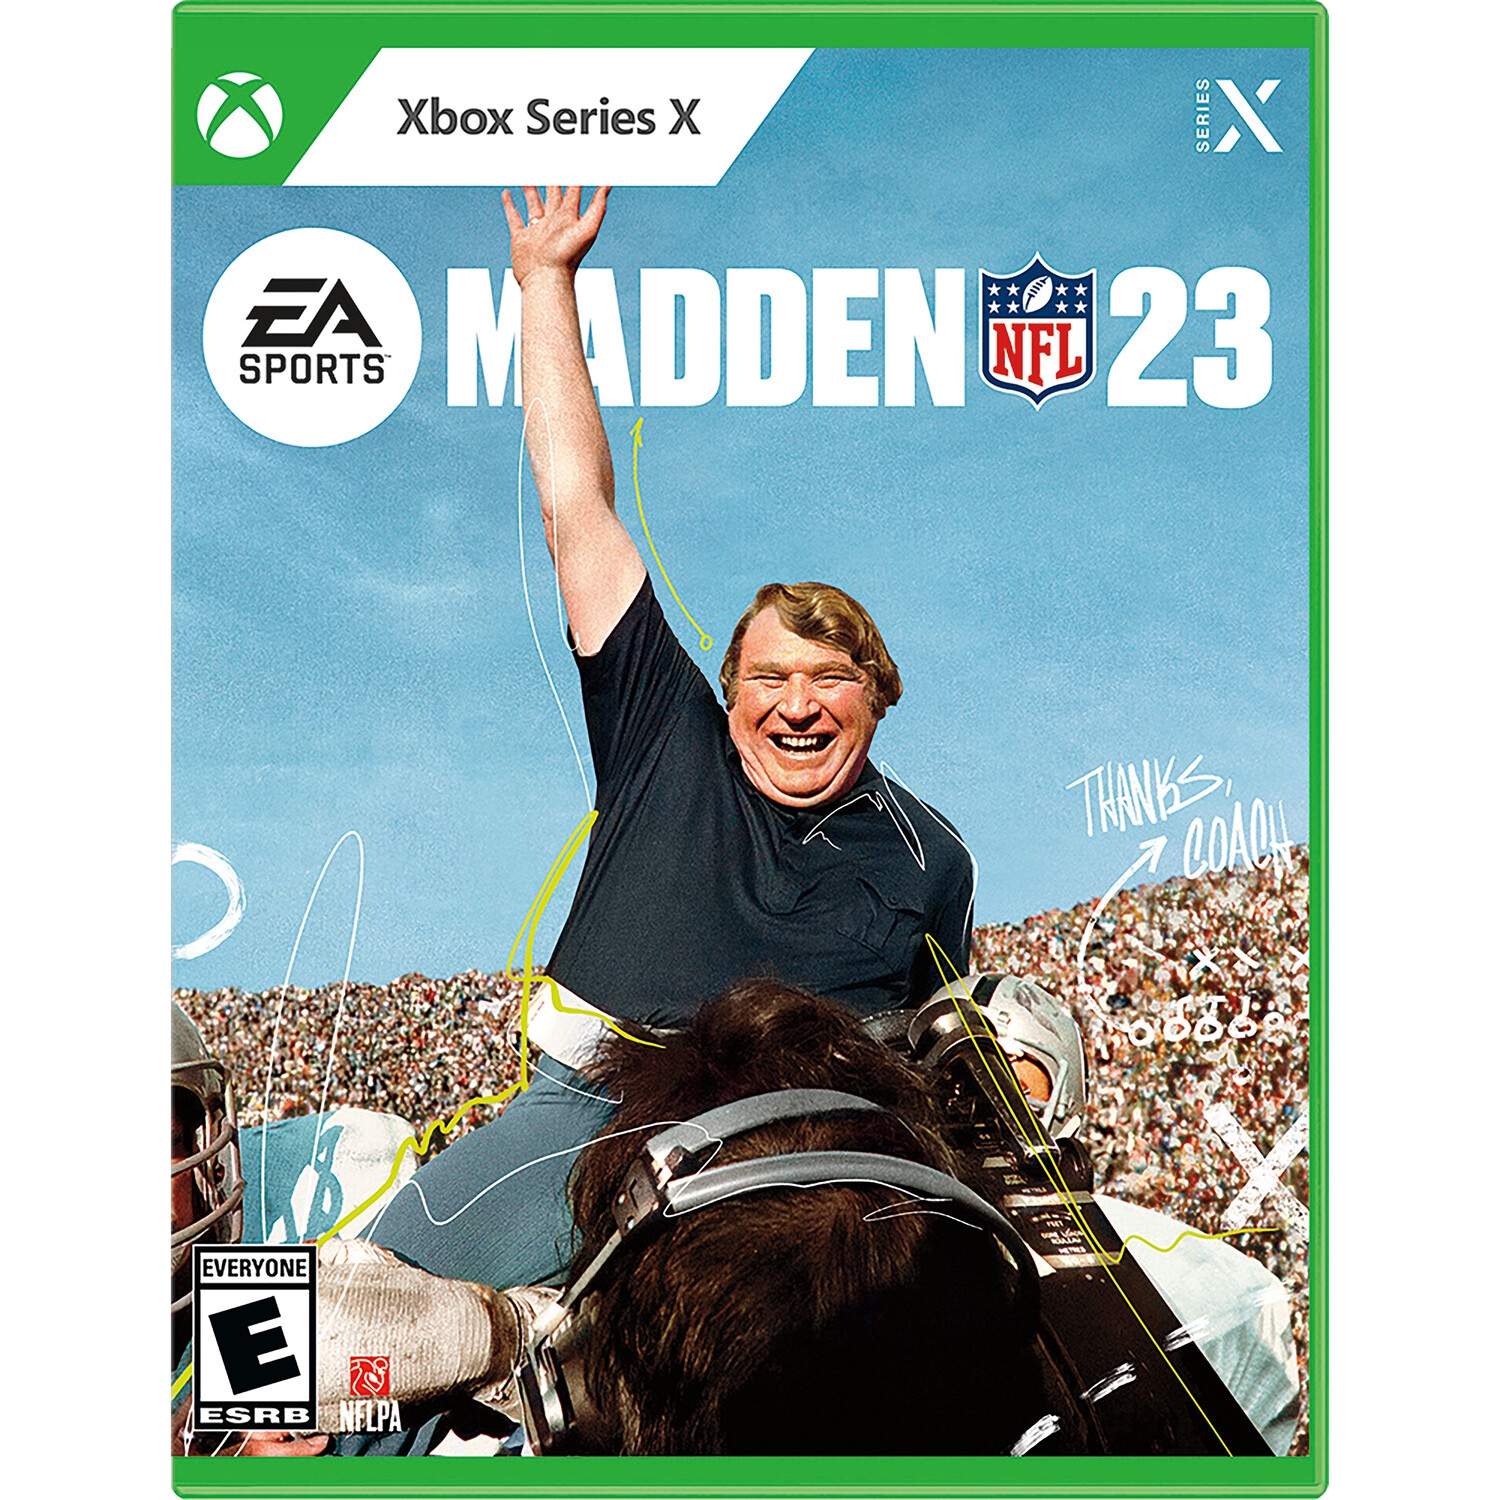 MADDEN NFL 23 for Xbox Series X [VIDEOGAMES] Xbox Series X